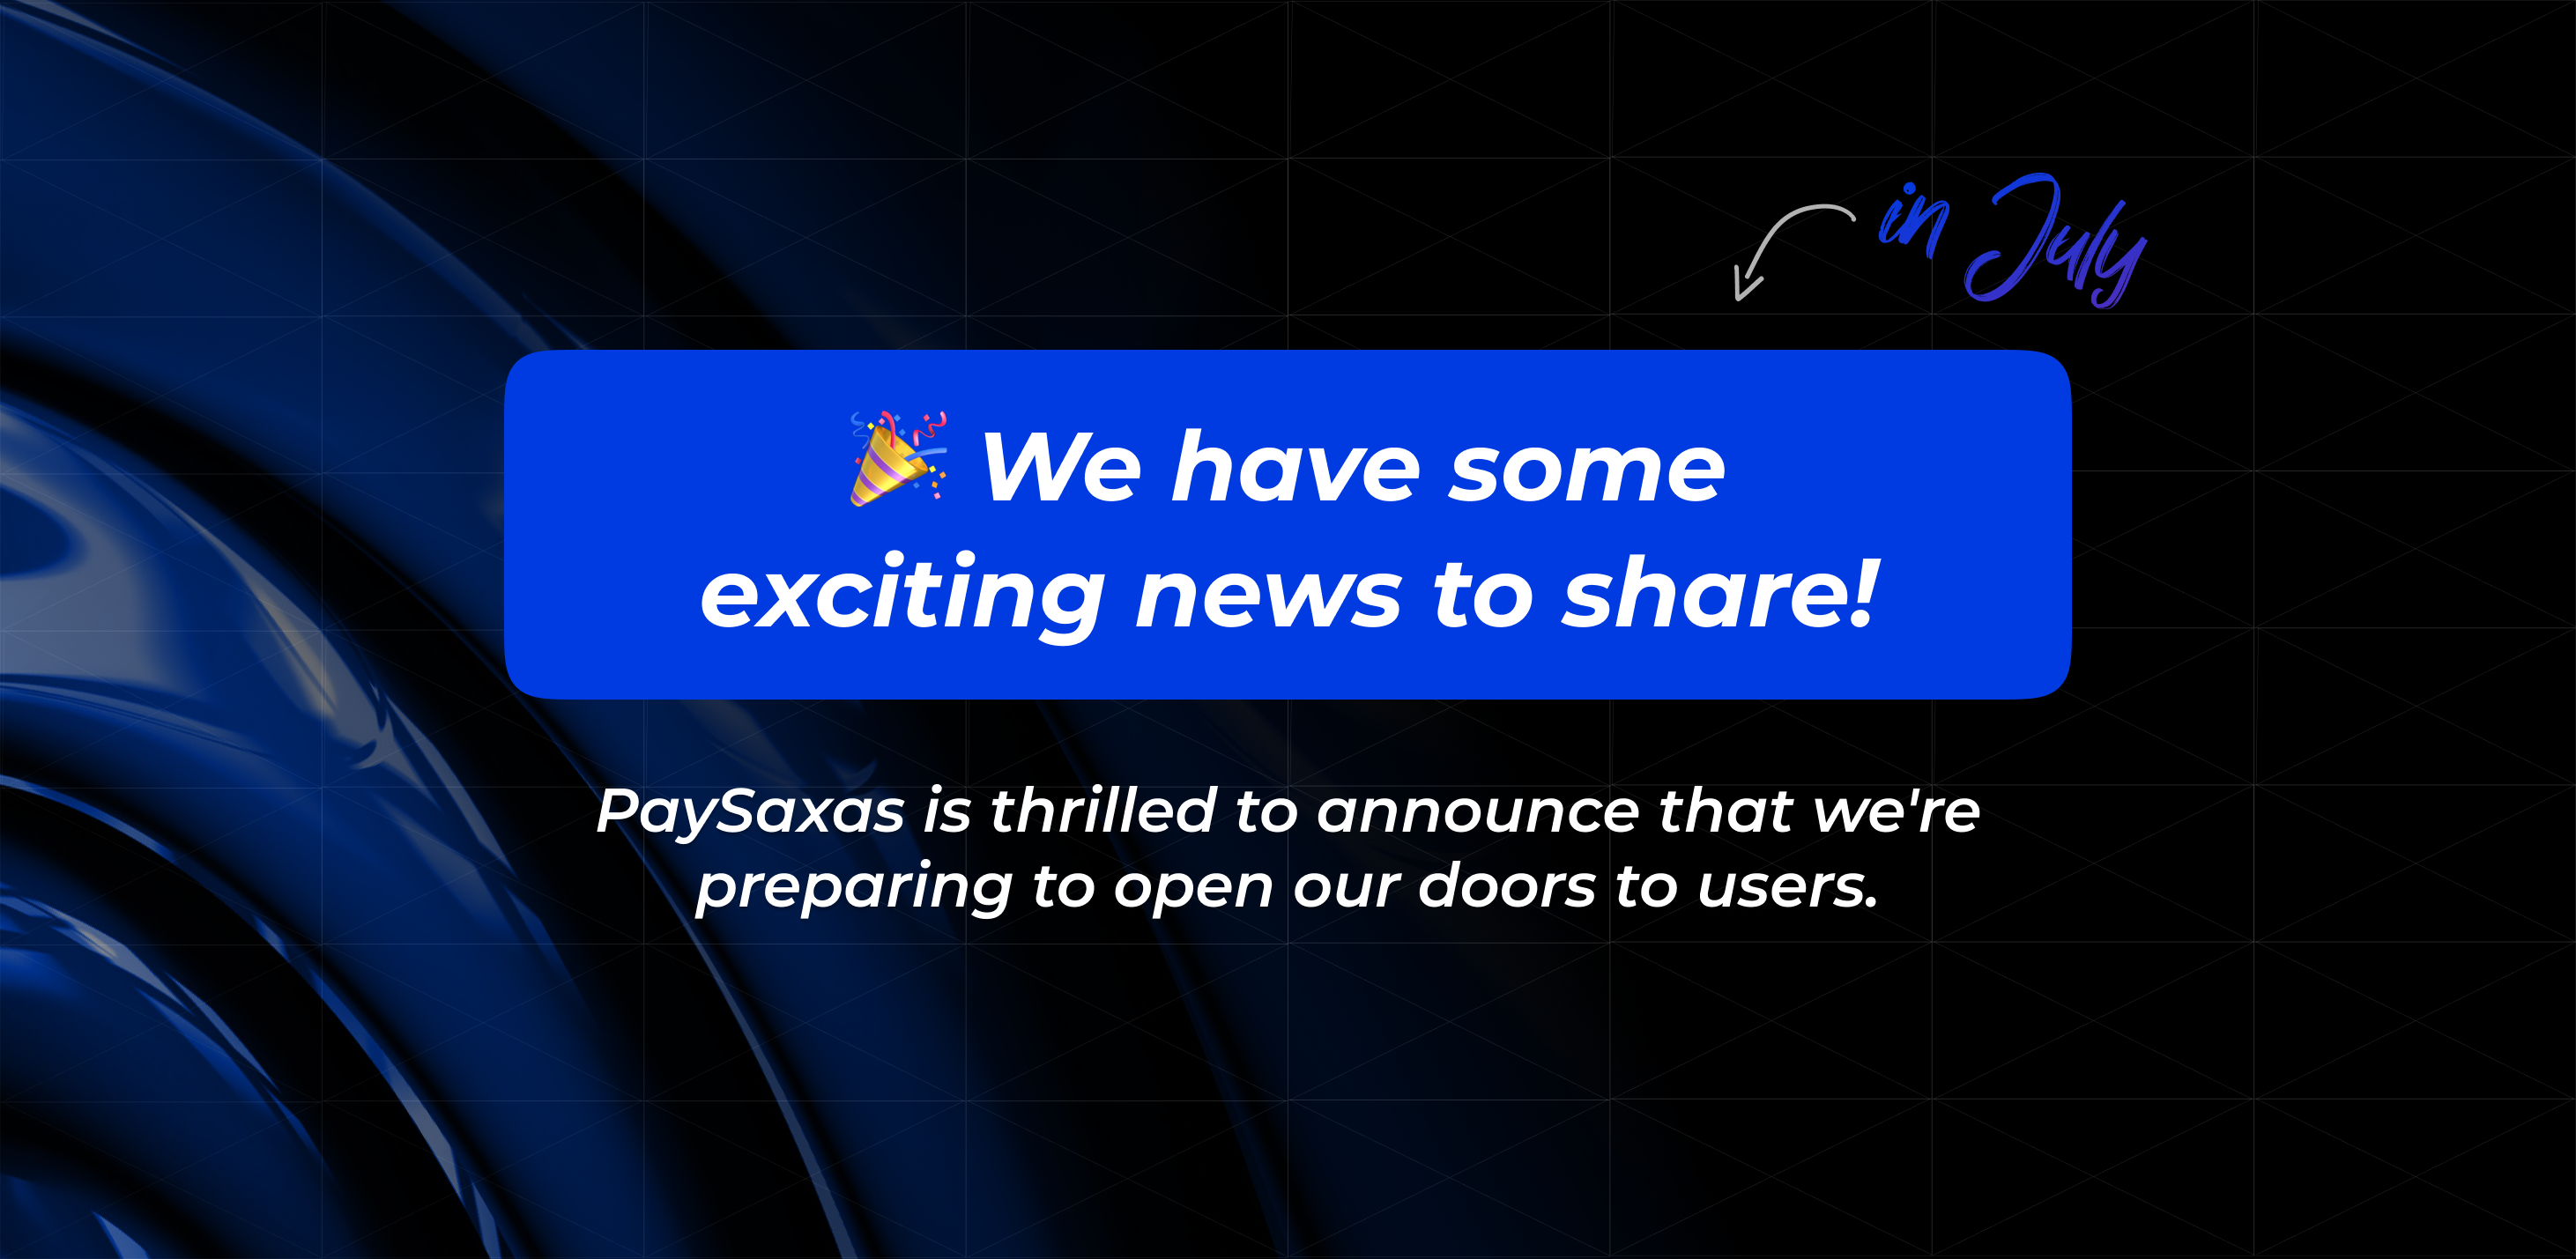 We have some exciting news to share! - 3